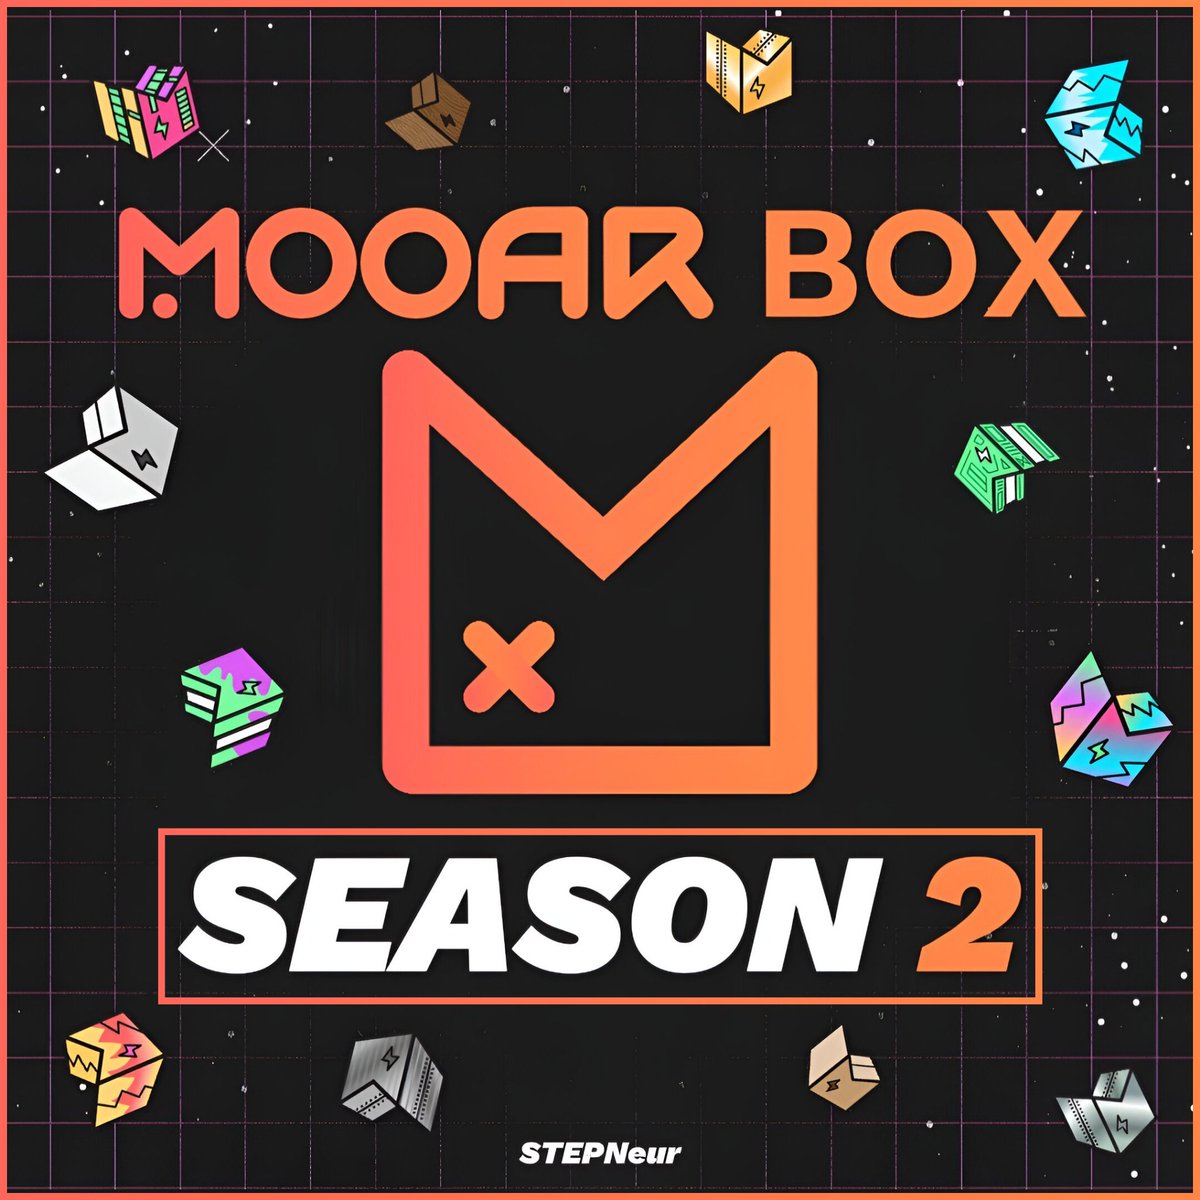 𝗠𝗢𝗢𝗔𝗥 𝗕𝗢𝗫 - 𝗦𝗘𝗔𝗦𝗢𝗡 𝟮 ~ Very Soon ~ Are you excited for the launch of season 2 of the Mooar boxes? 😸📦 I can’t wait to find out what new features they have in store!!!! 👀